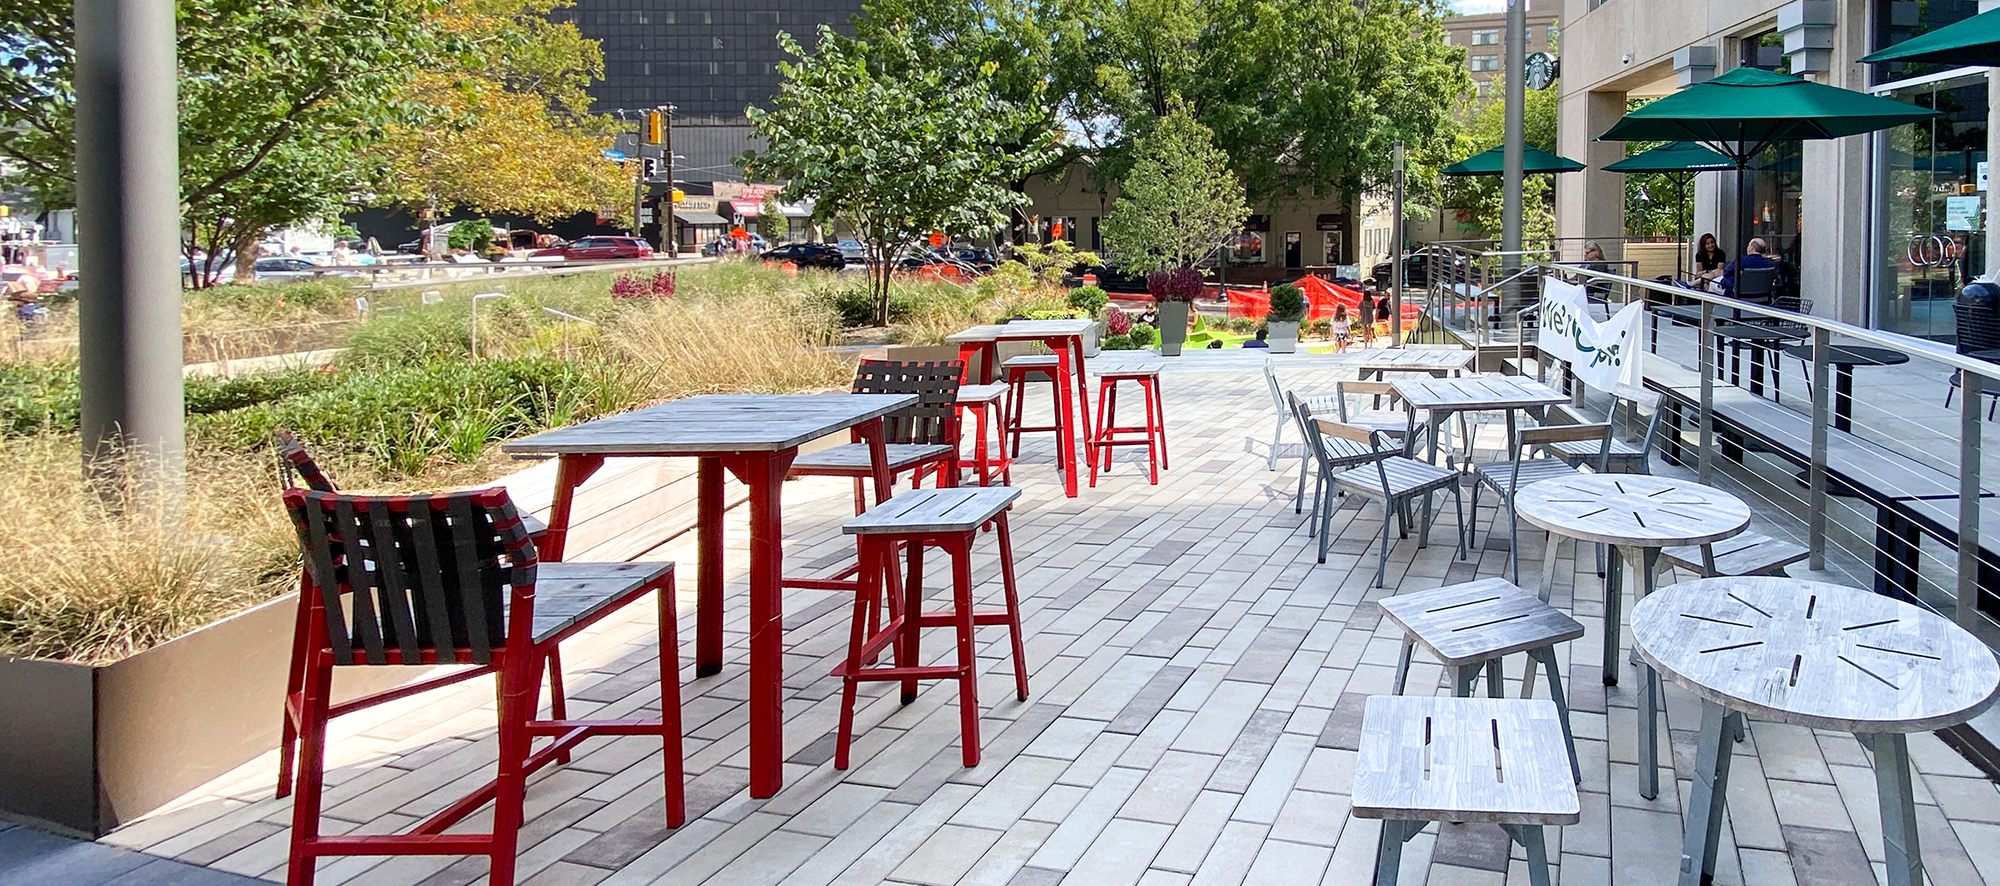 A public dining area made with Unilock Artline rectangular pavers in a mix of warm colors sits between a café's outdoor seating and gardens.